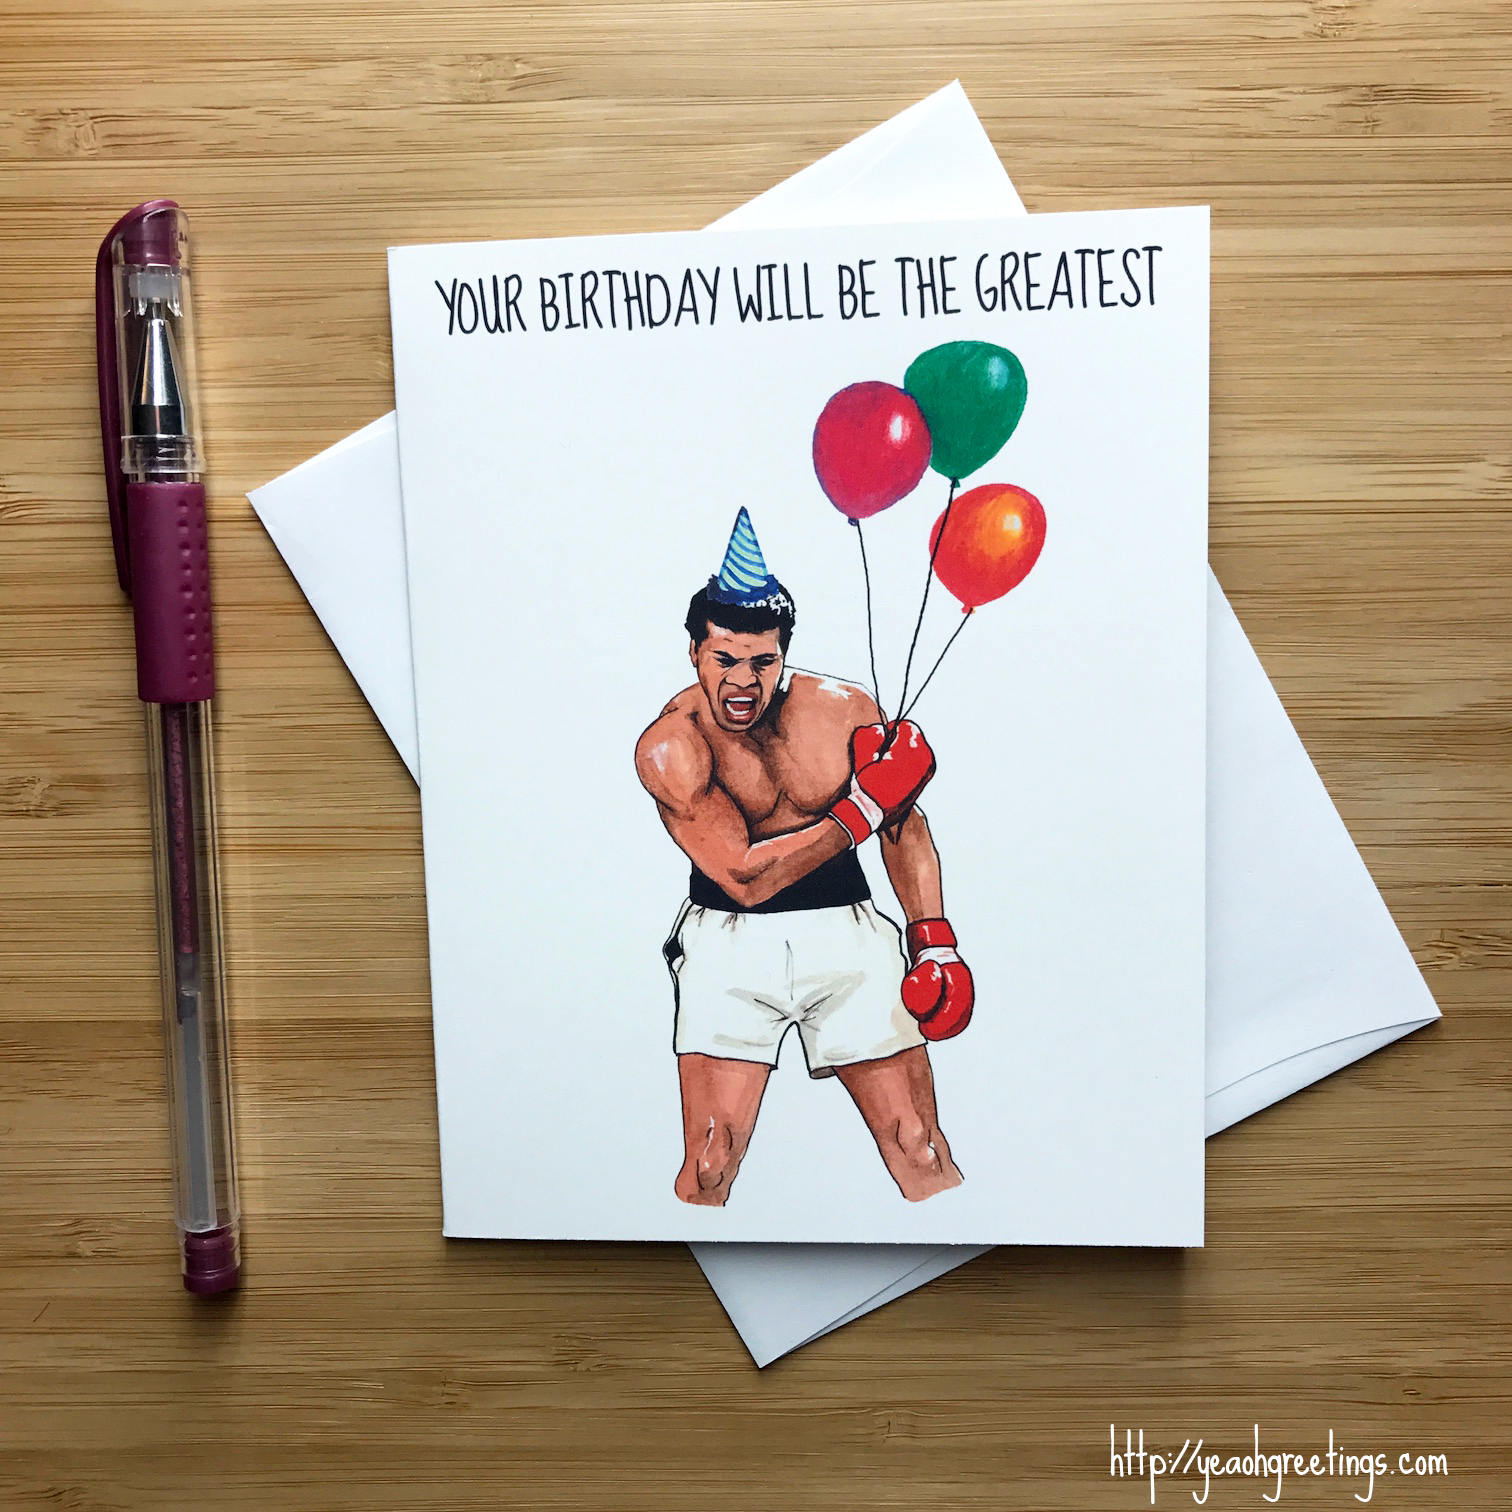 Cute Ideas For Birthday Cards Cute Boxing Birthday Card Boxing Gift Mma Sports Fan Birthday Gift Birthday Card Husband Birthday Greeting Card Ideas Birthday Party